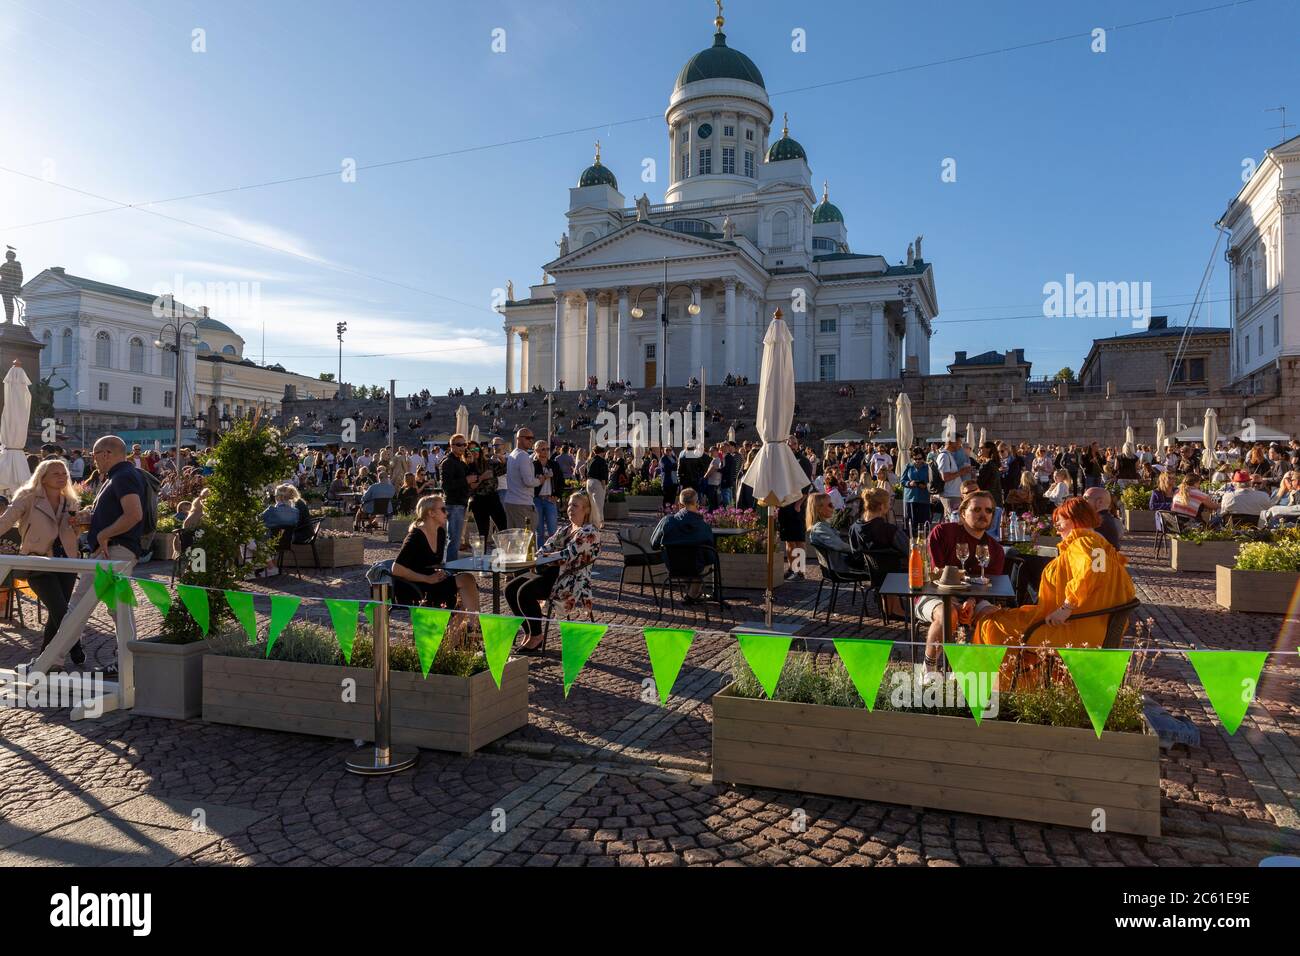 Senate square, downtown Helsinki, is transformed into a giant restaurant area. 16 restaurants are providing their specialities to customers. Stock Photo